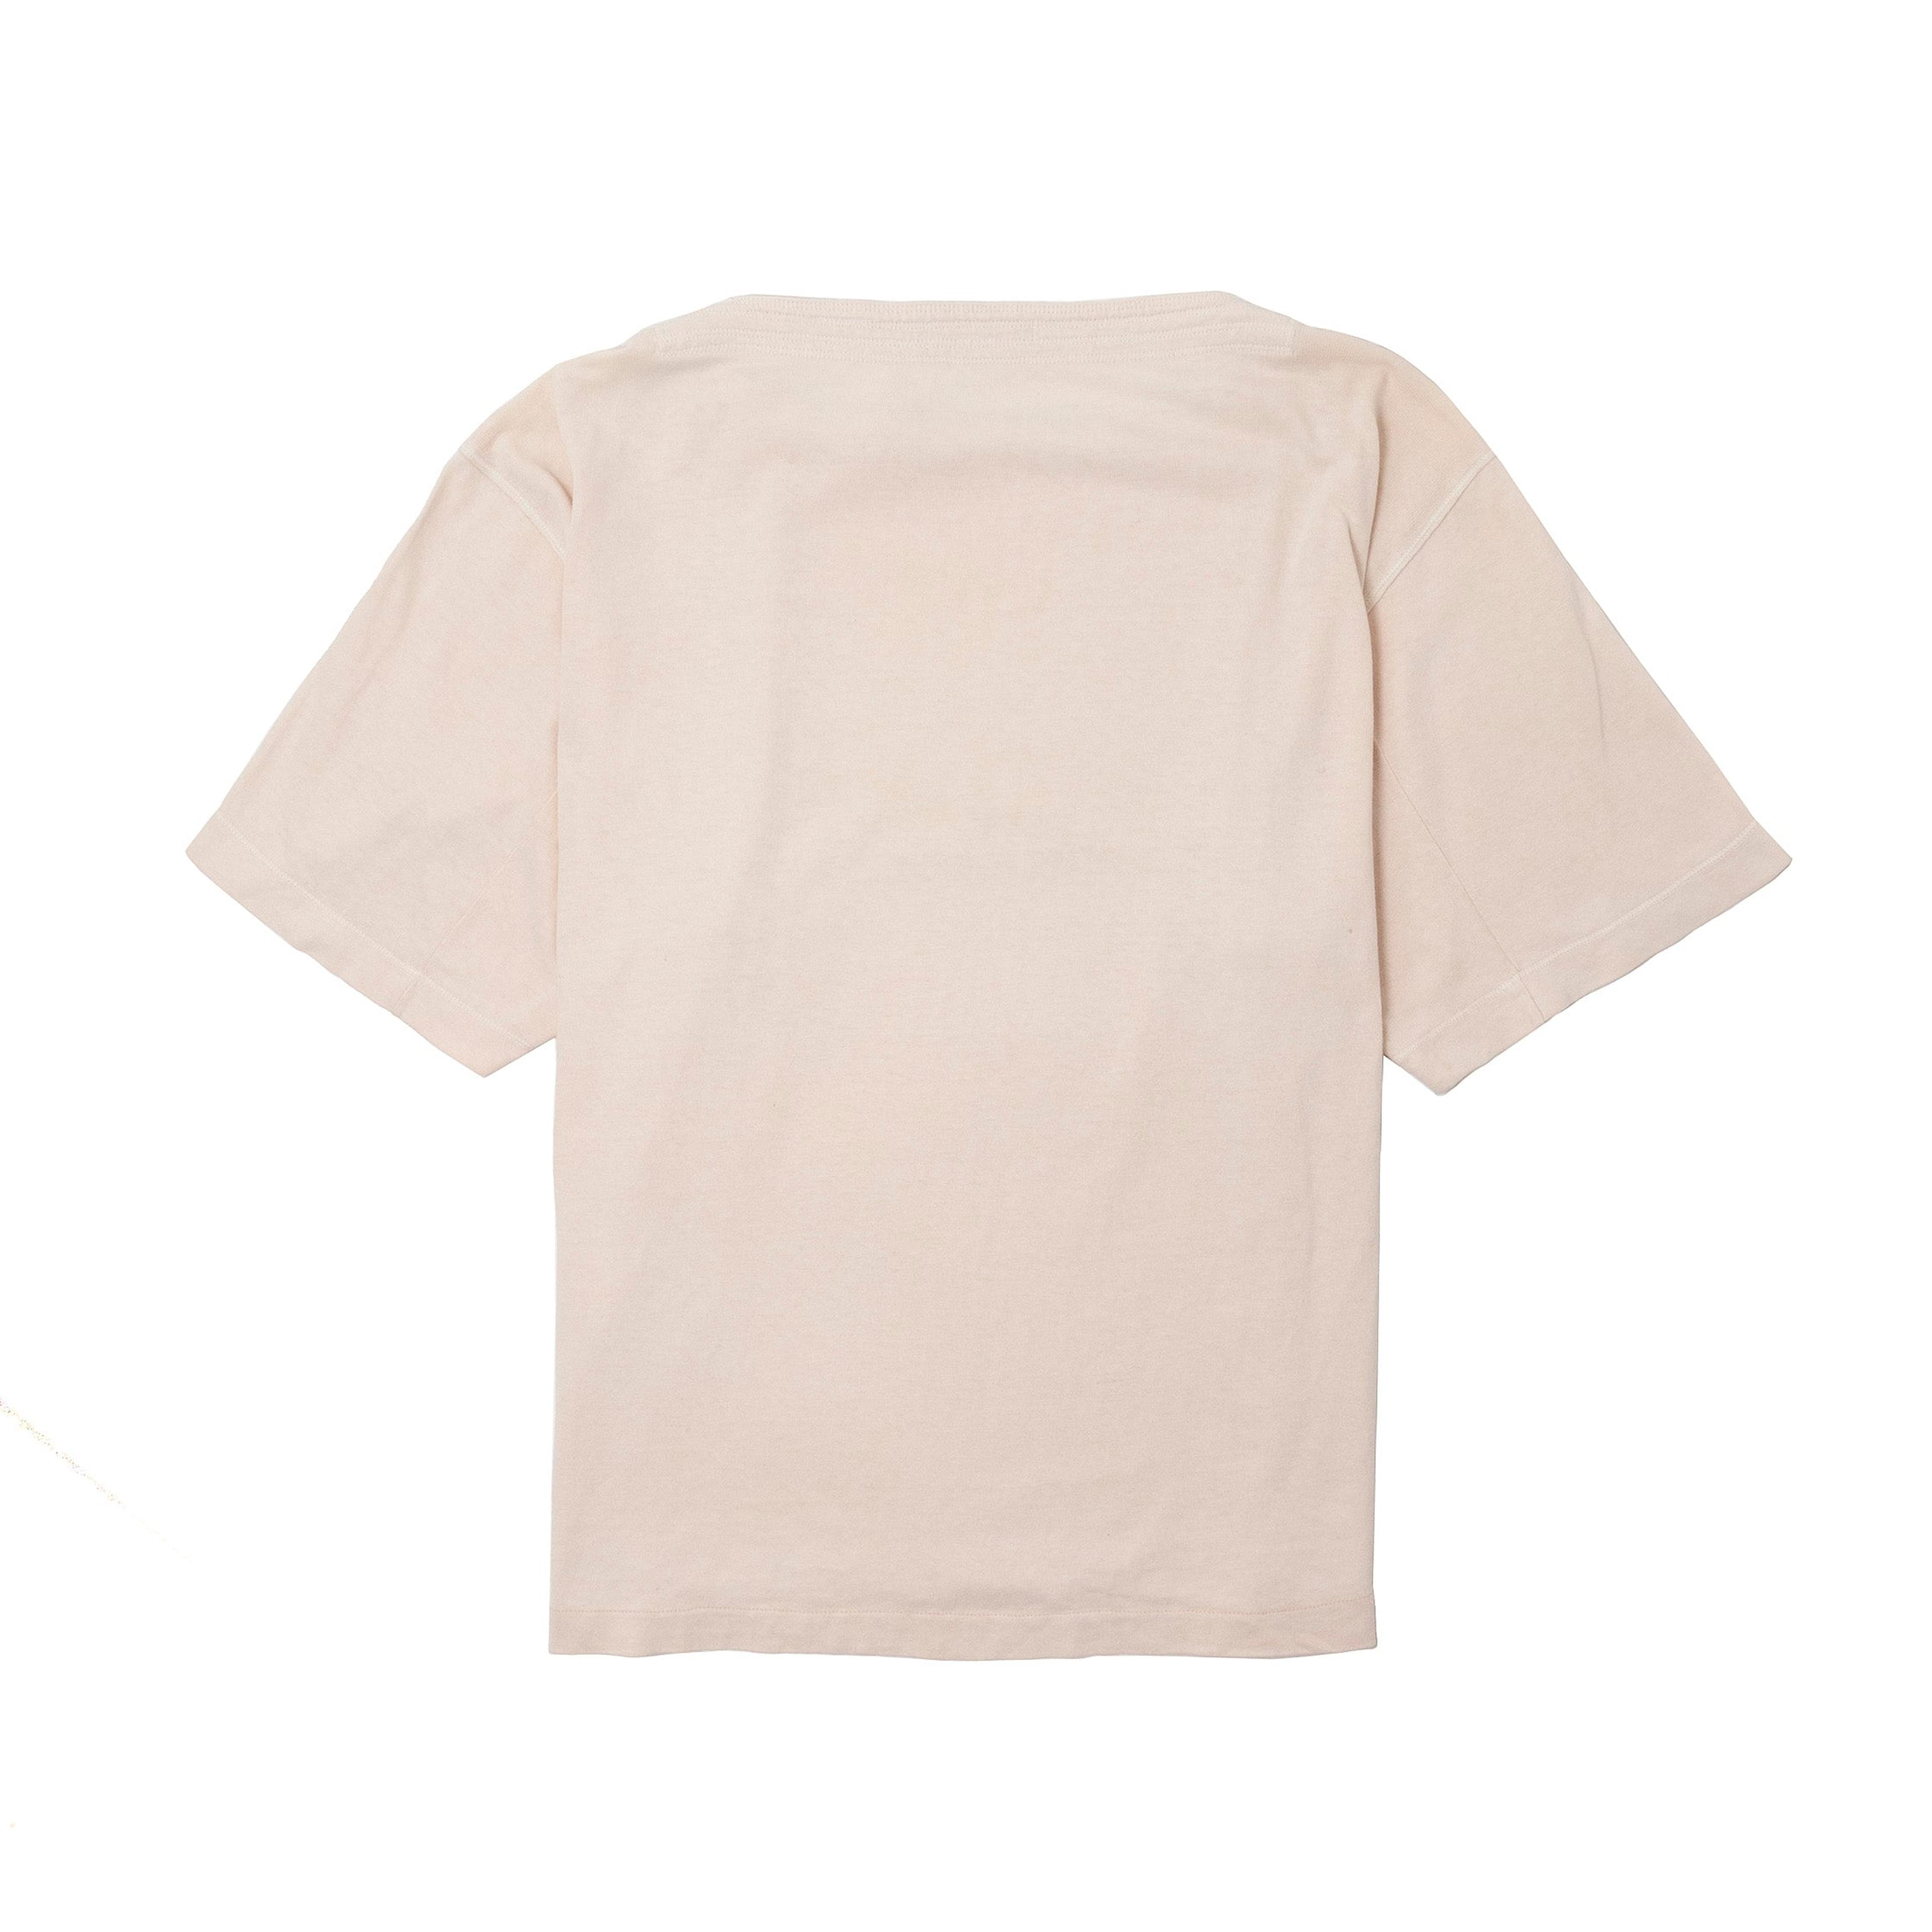 Alternate View 3 of Stone Island Pink Spellout Tee